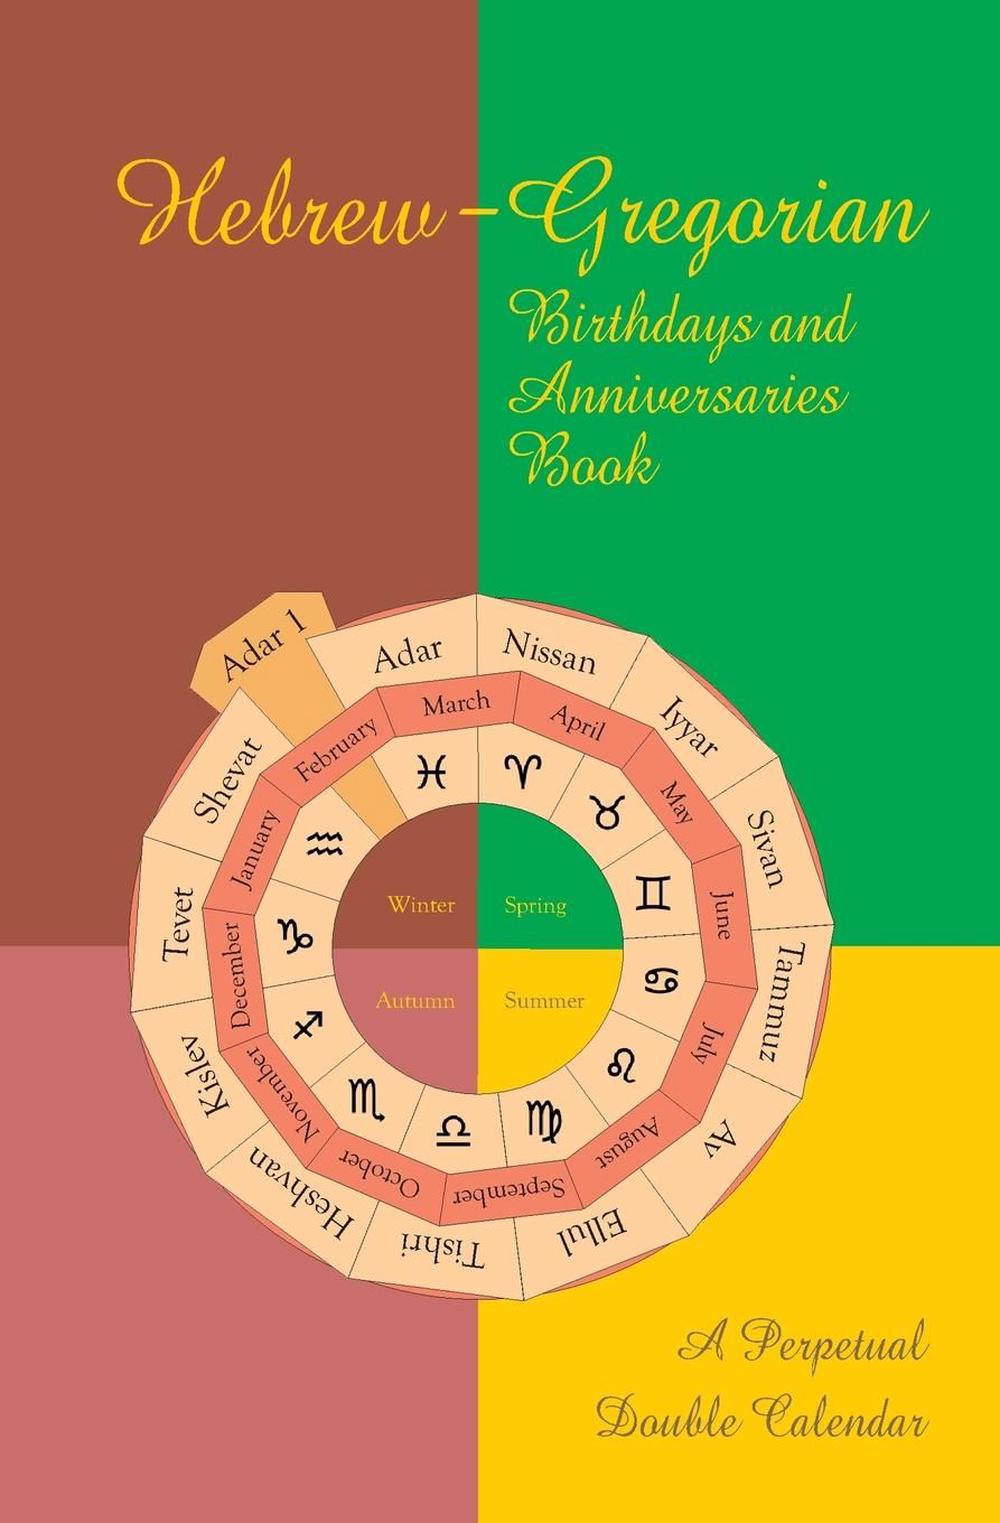 Hebrew Gregorian Birthdays And Anniversaries Book A Perpetual Double